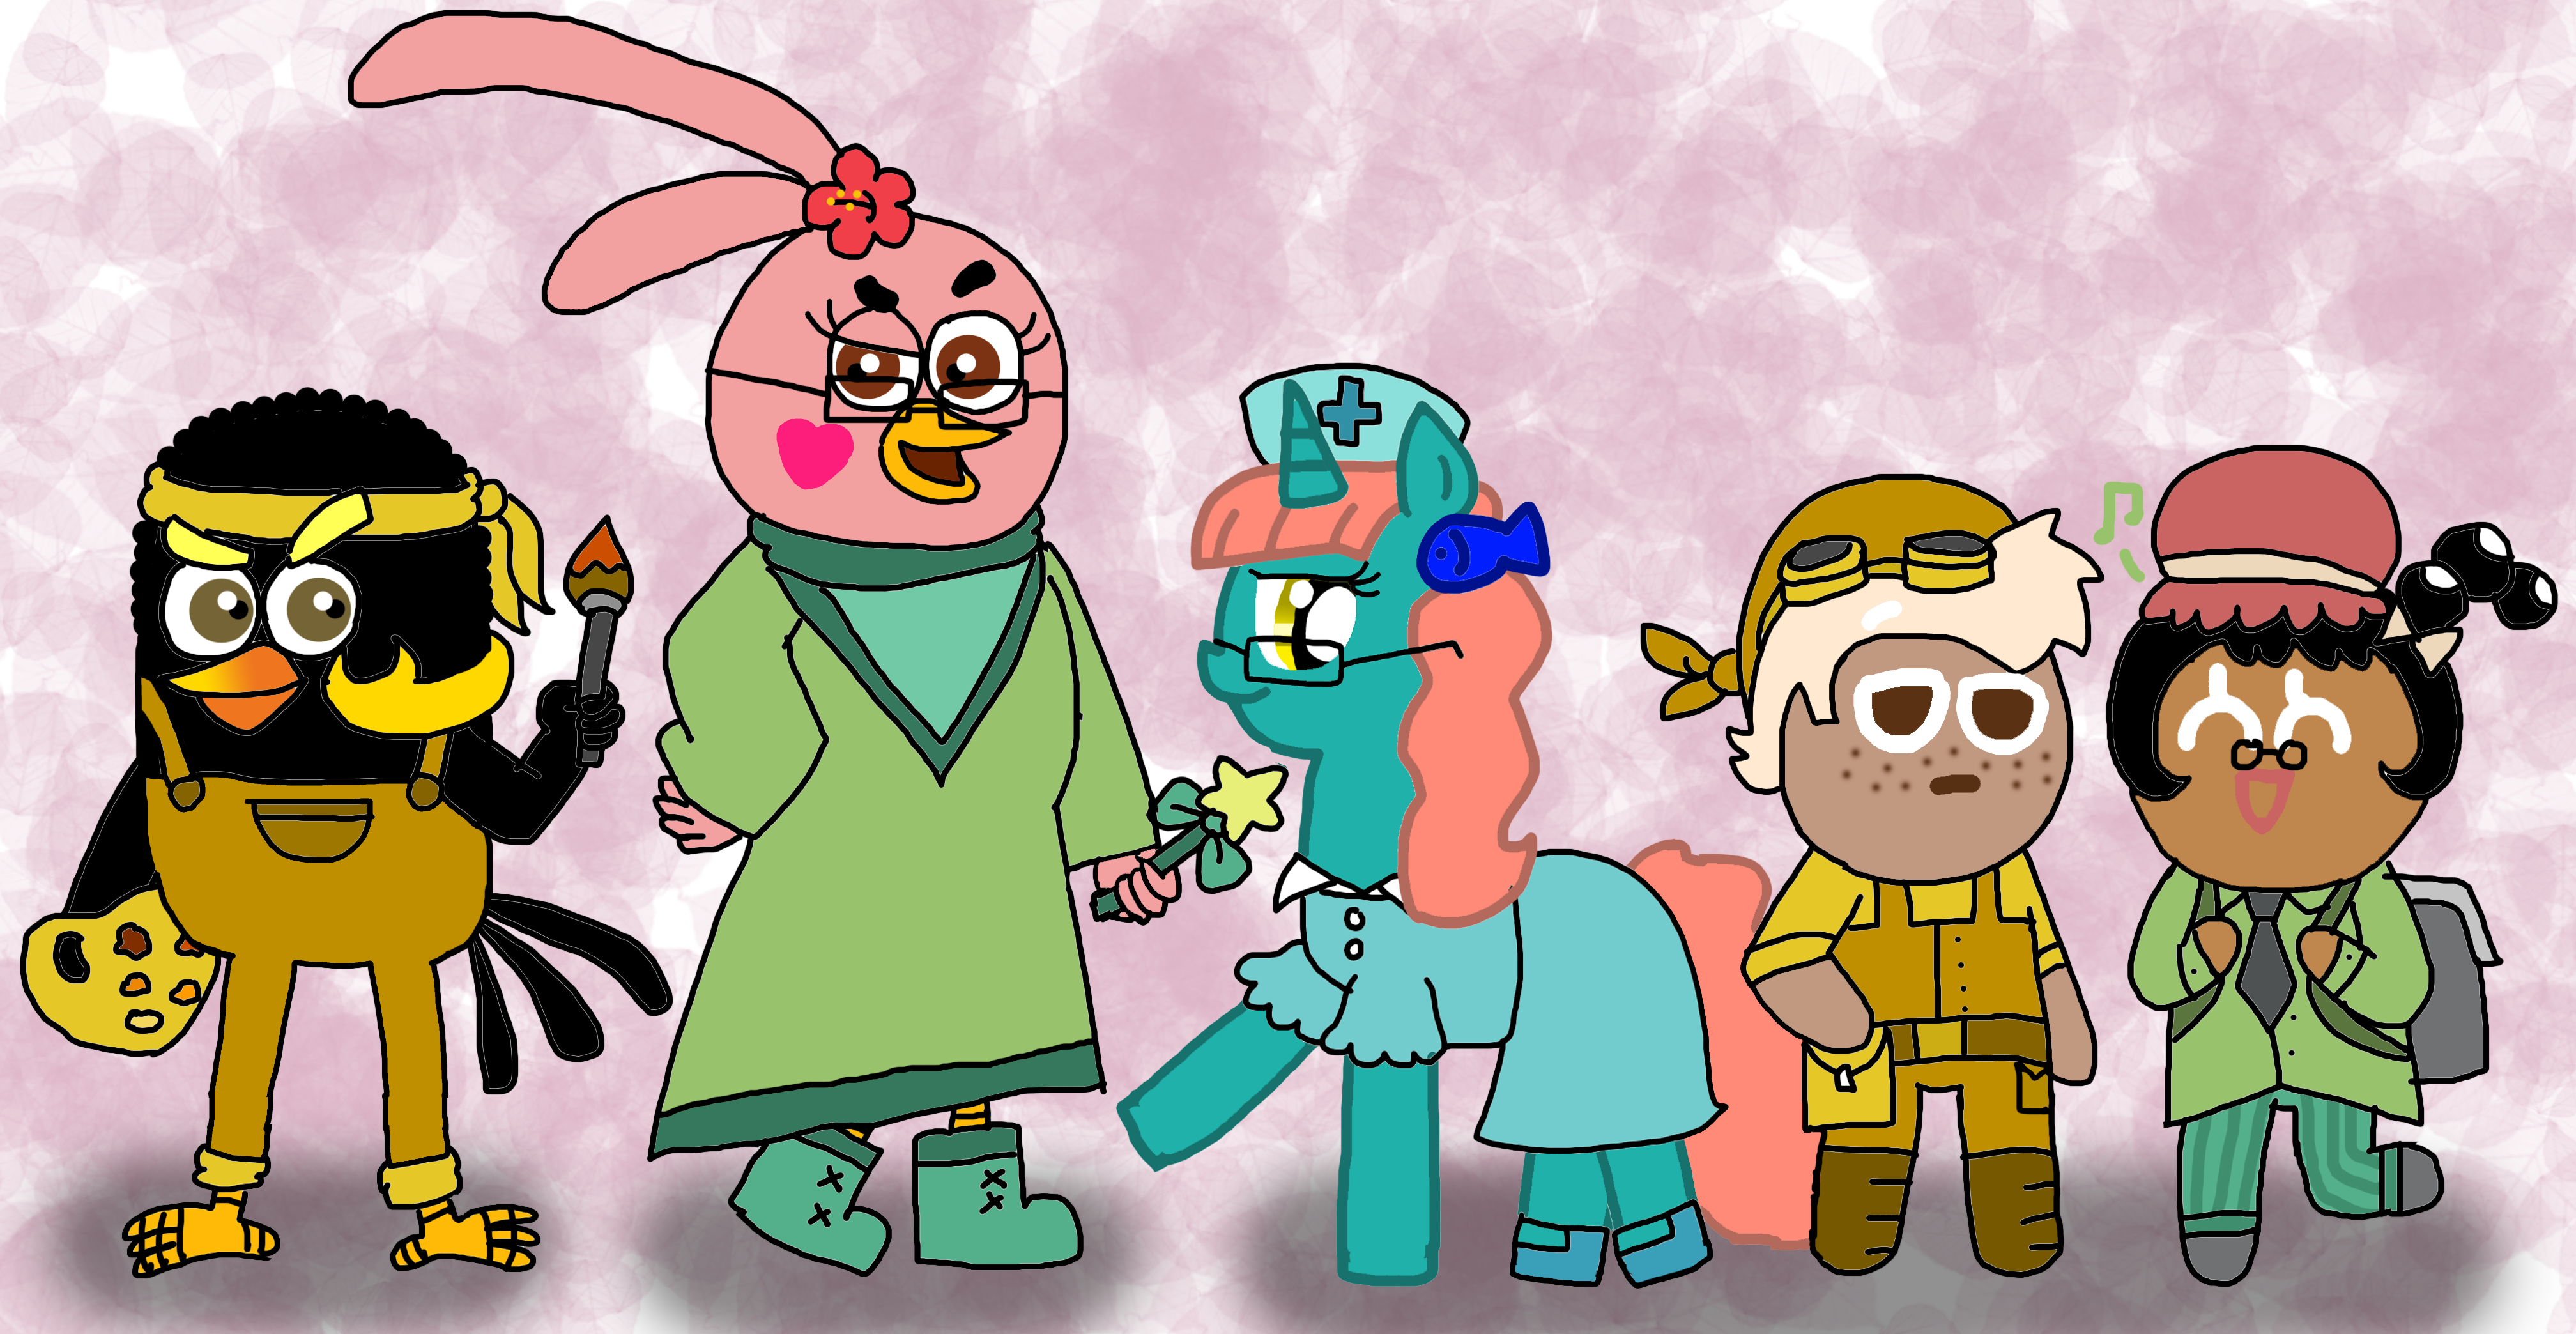 MY OC Squad with their MBTI types! by Hibiscus-Bubbles on DeviantArt